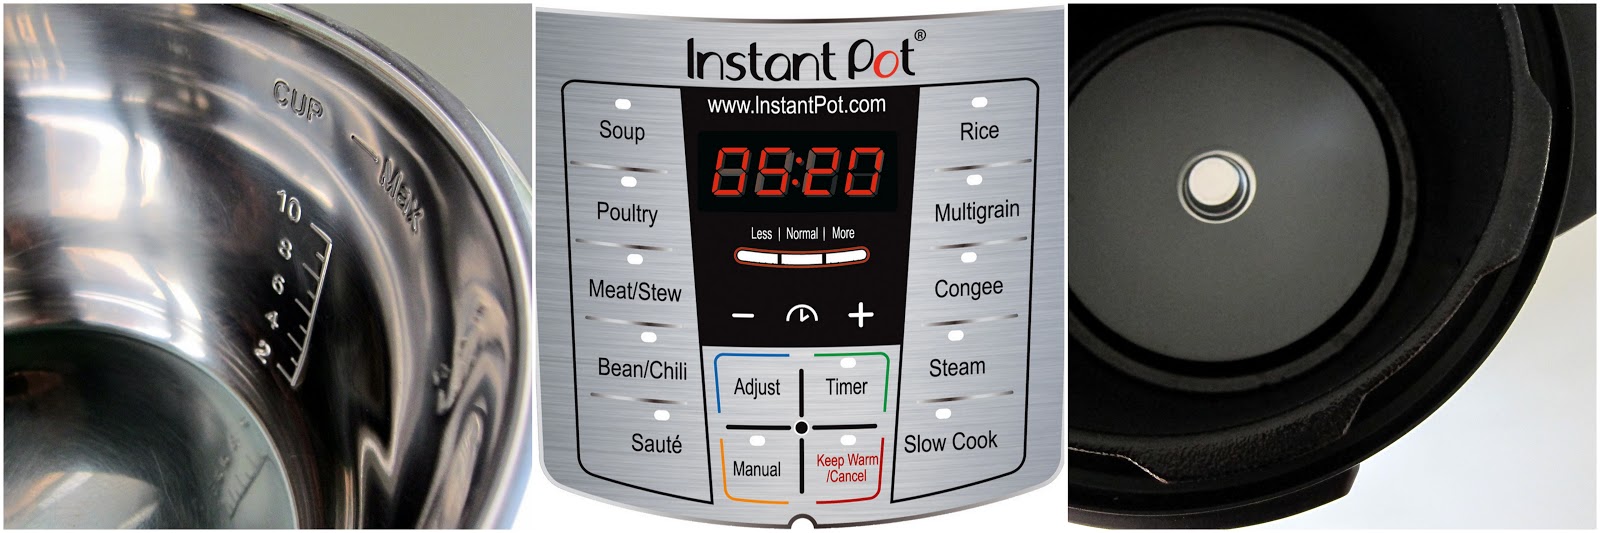 Instant Pot LUX mini 3-Quart 6-in-1 Multi-Use Programmable Pressure Cooker,  Slow Cooker, Rice Cooker, Sauté, Steamer, and Warmer 